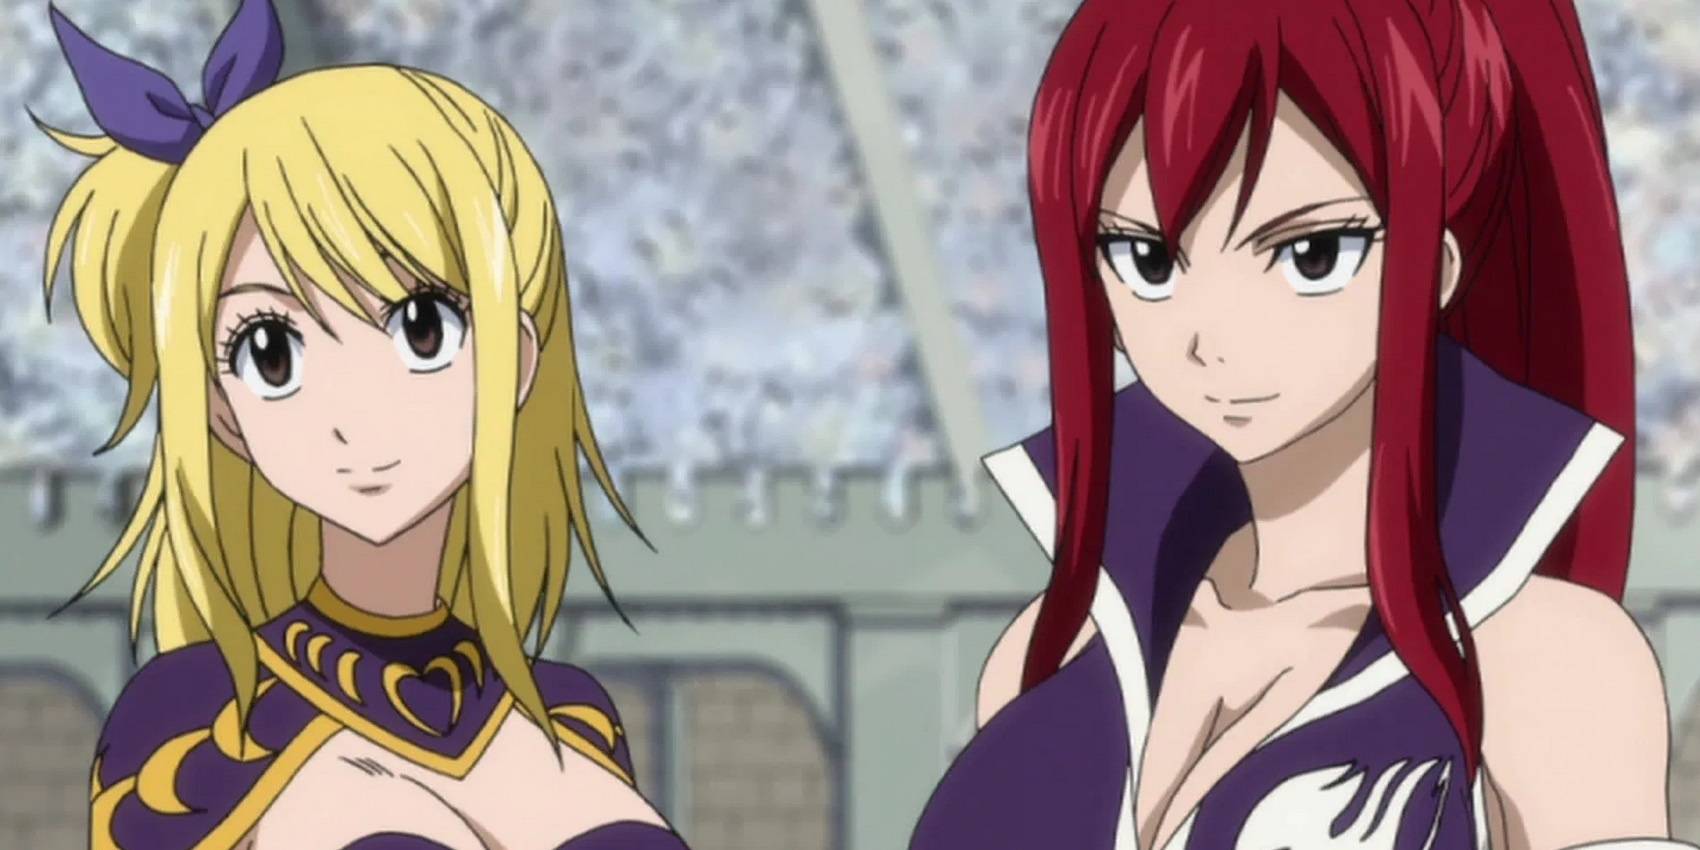 Erza and lucy